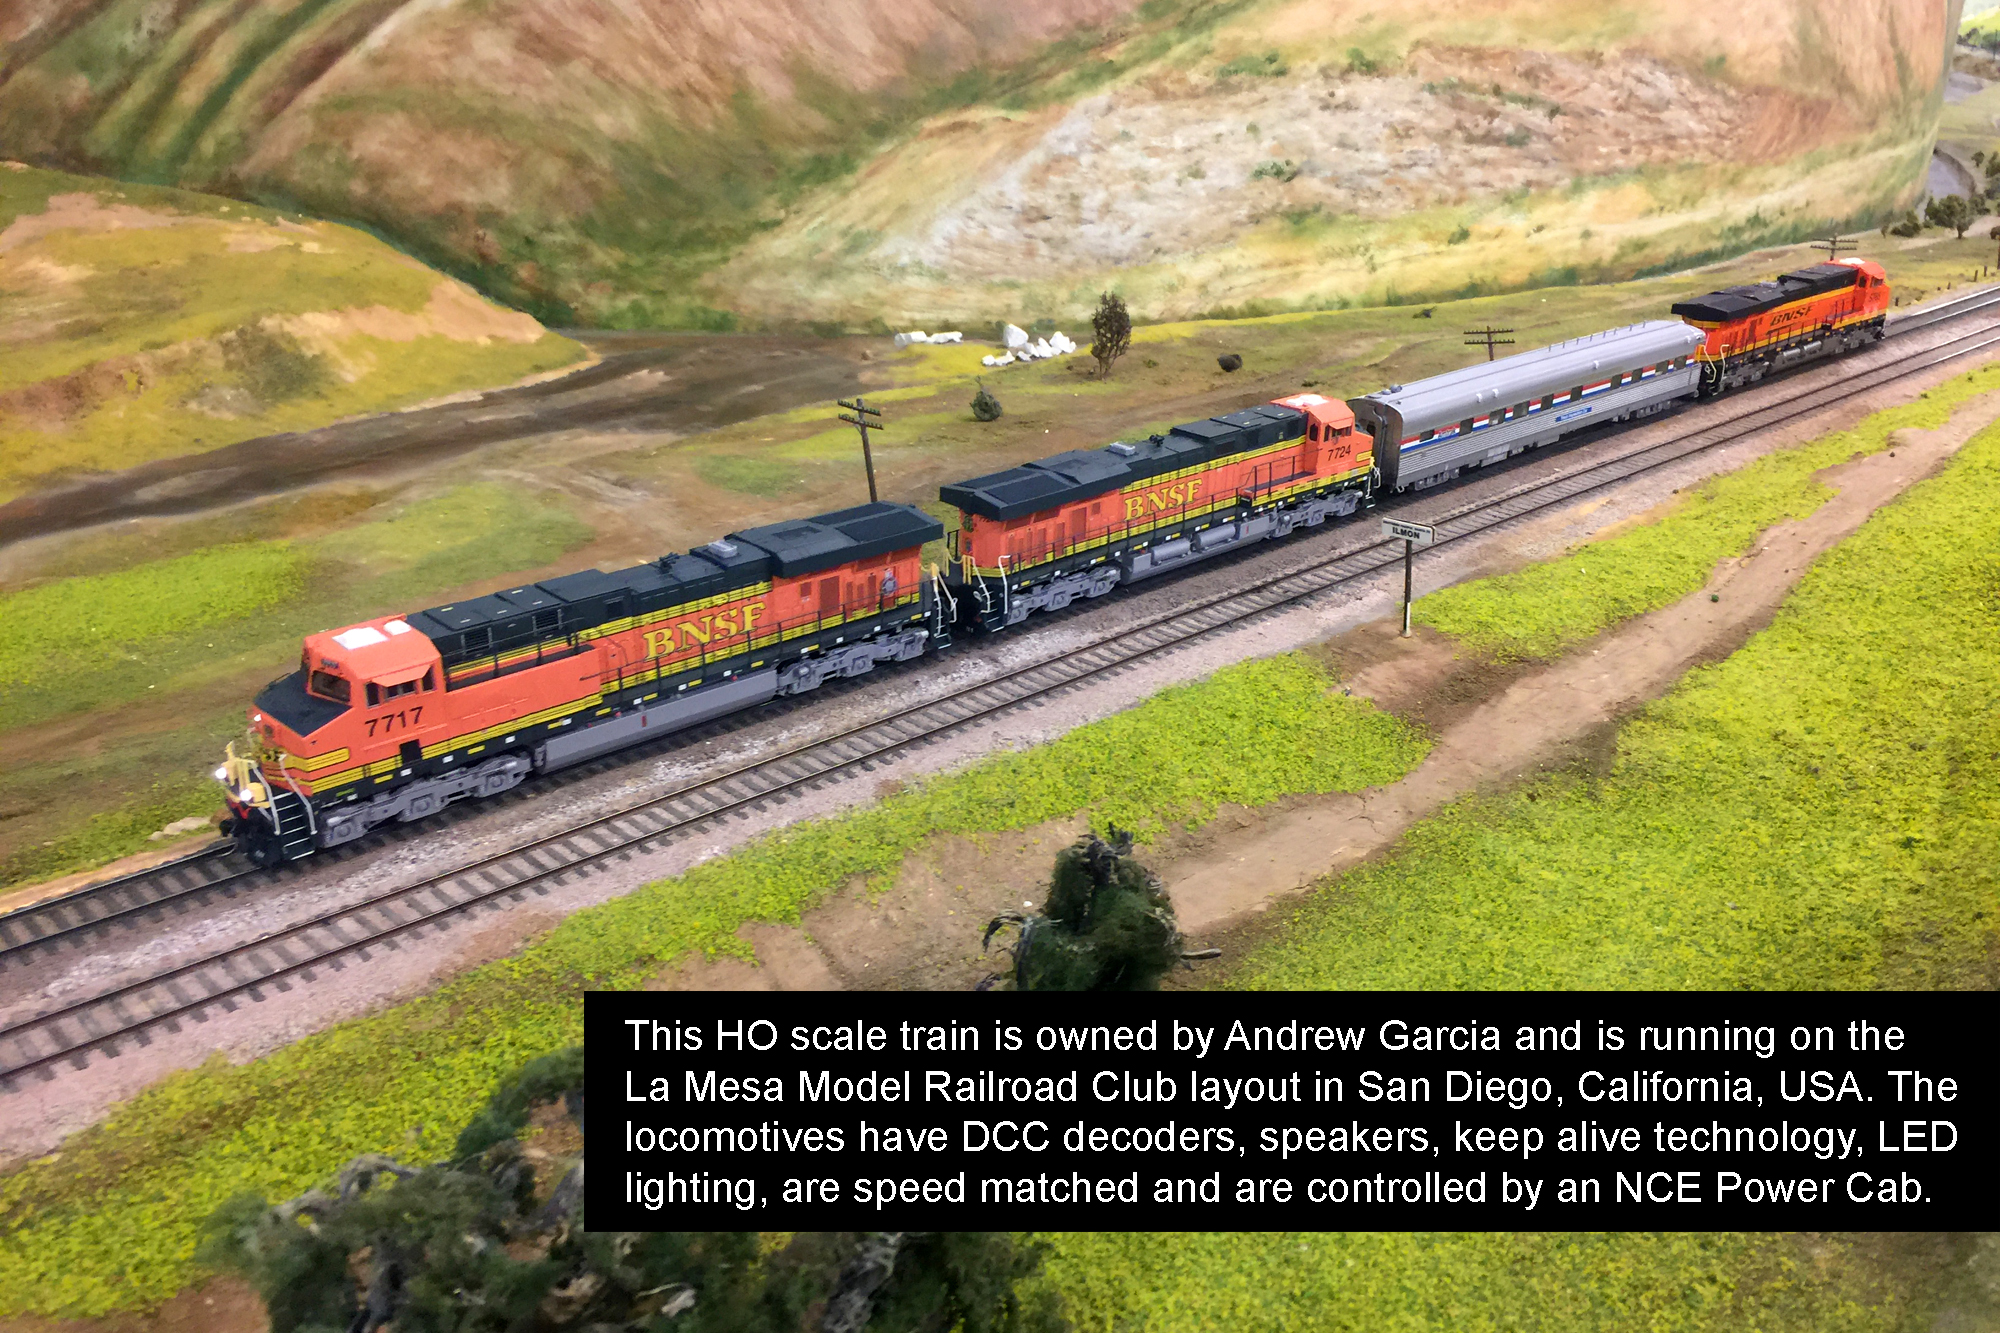 Locomotives owned by Andrew Garcia. 